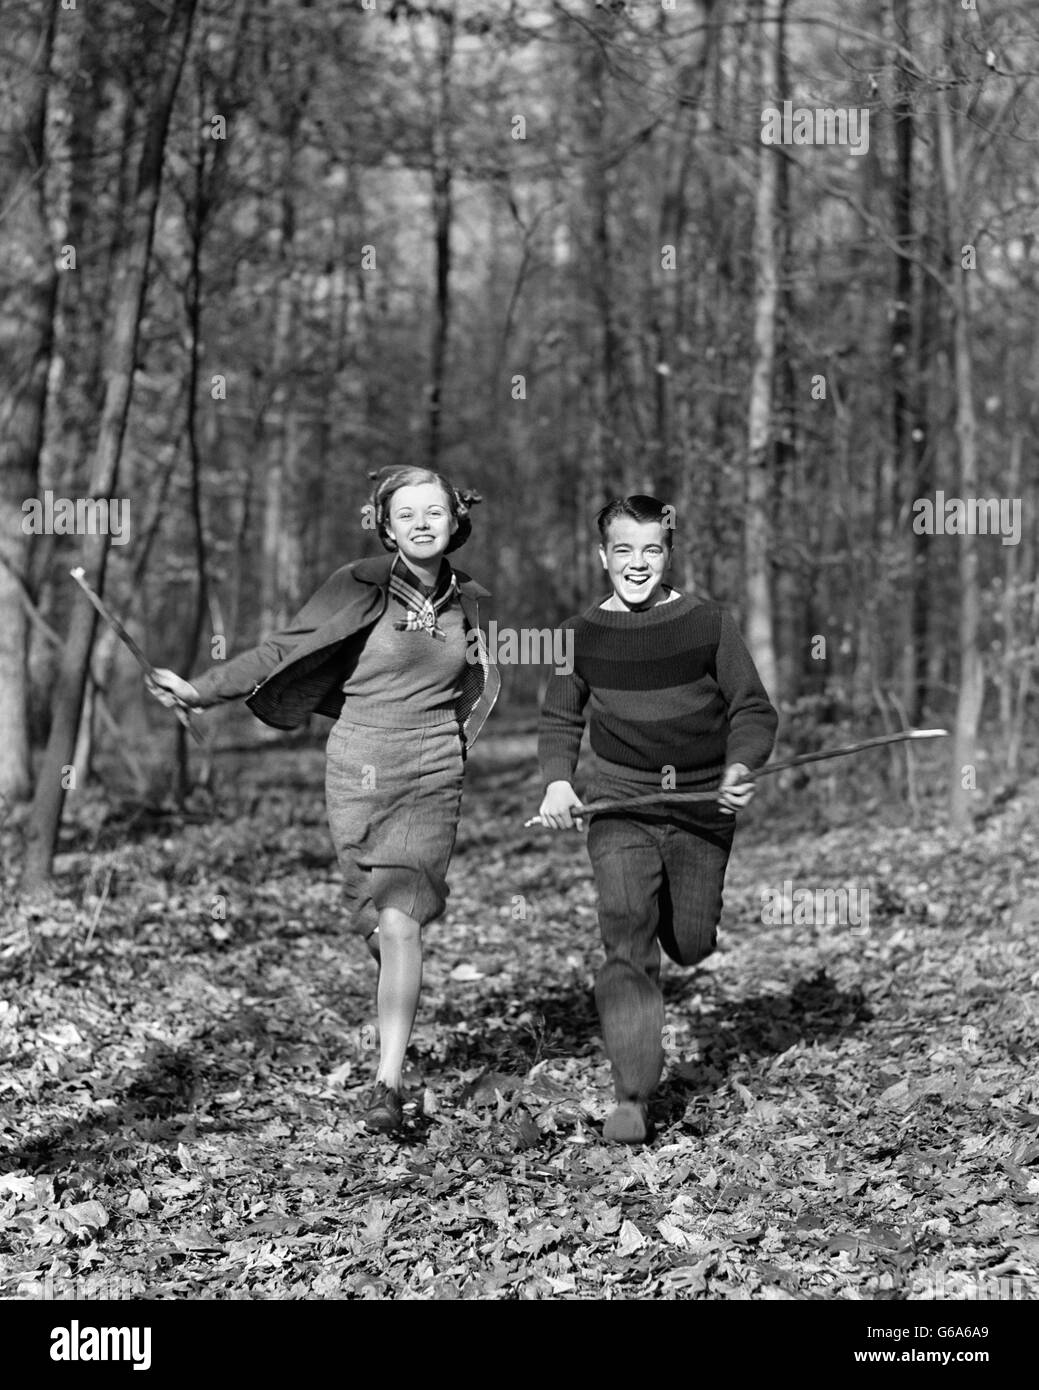 1940s SMILING TEENAGE COUPLE BOY GIRL RUNNING IN AUTUMN WOODS LANDSCAPE Stock Photo